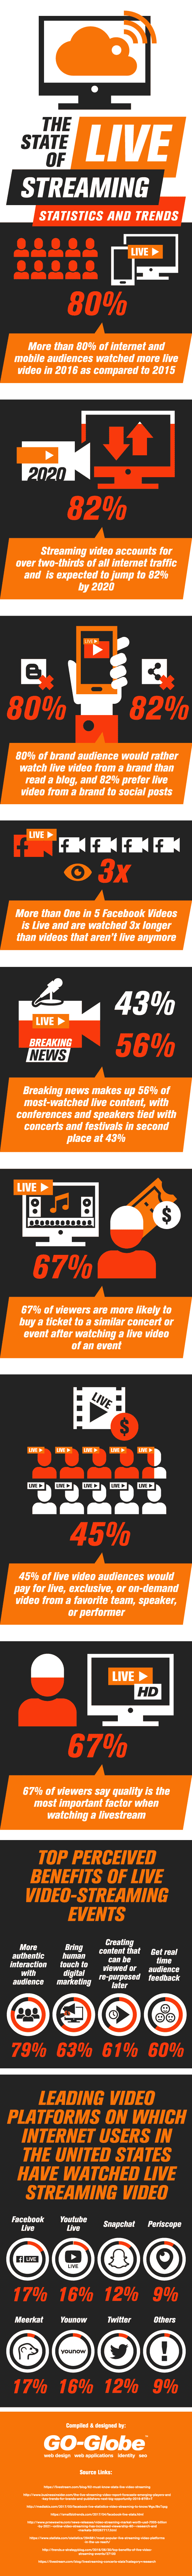 The State of Live Streaming- Statistics and Trends